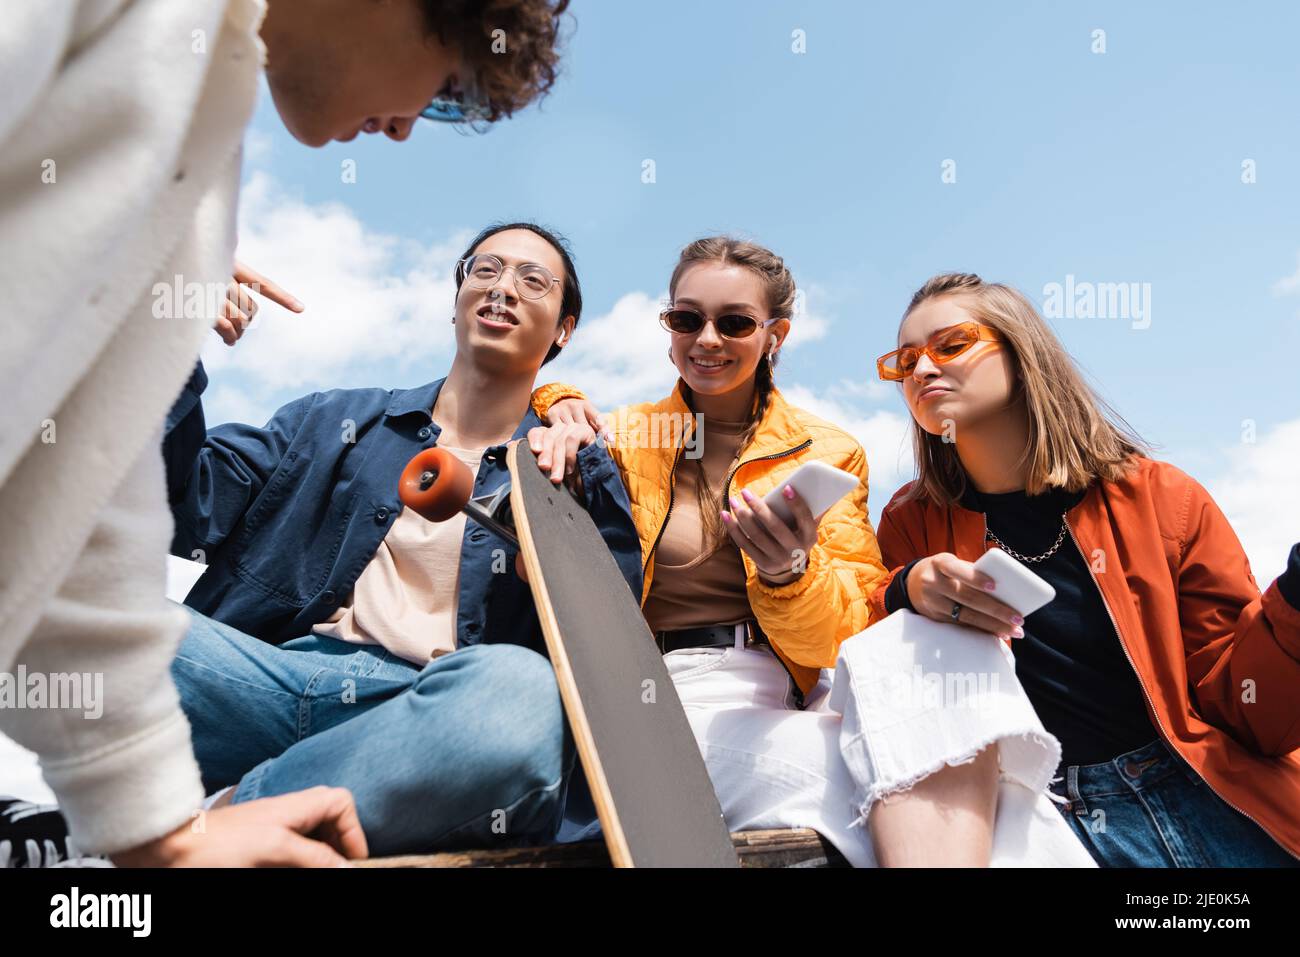 low angle view of asian skater pointing with finger near friends with smartphones outdoors Stock Photo